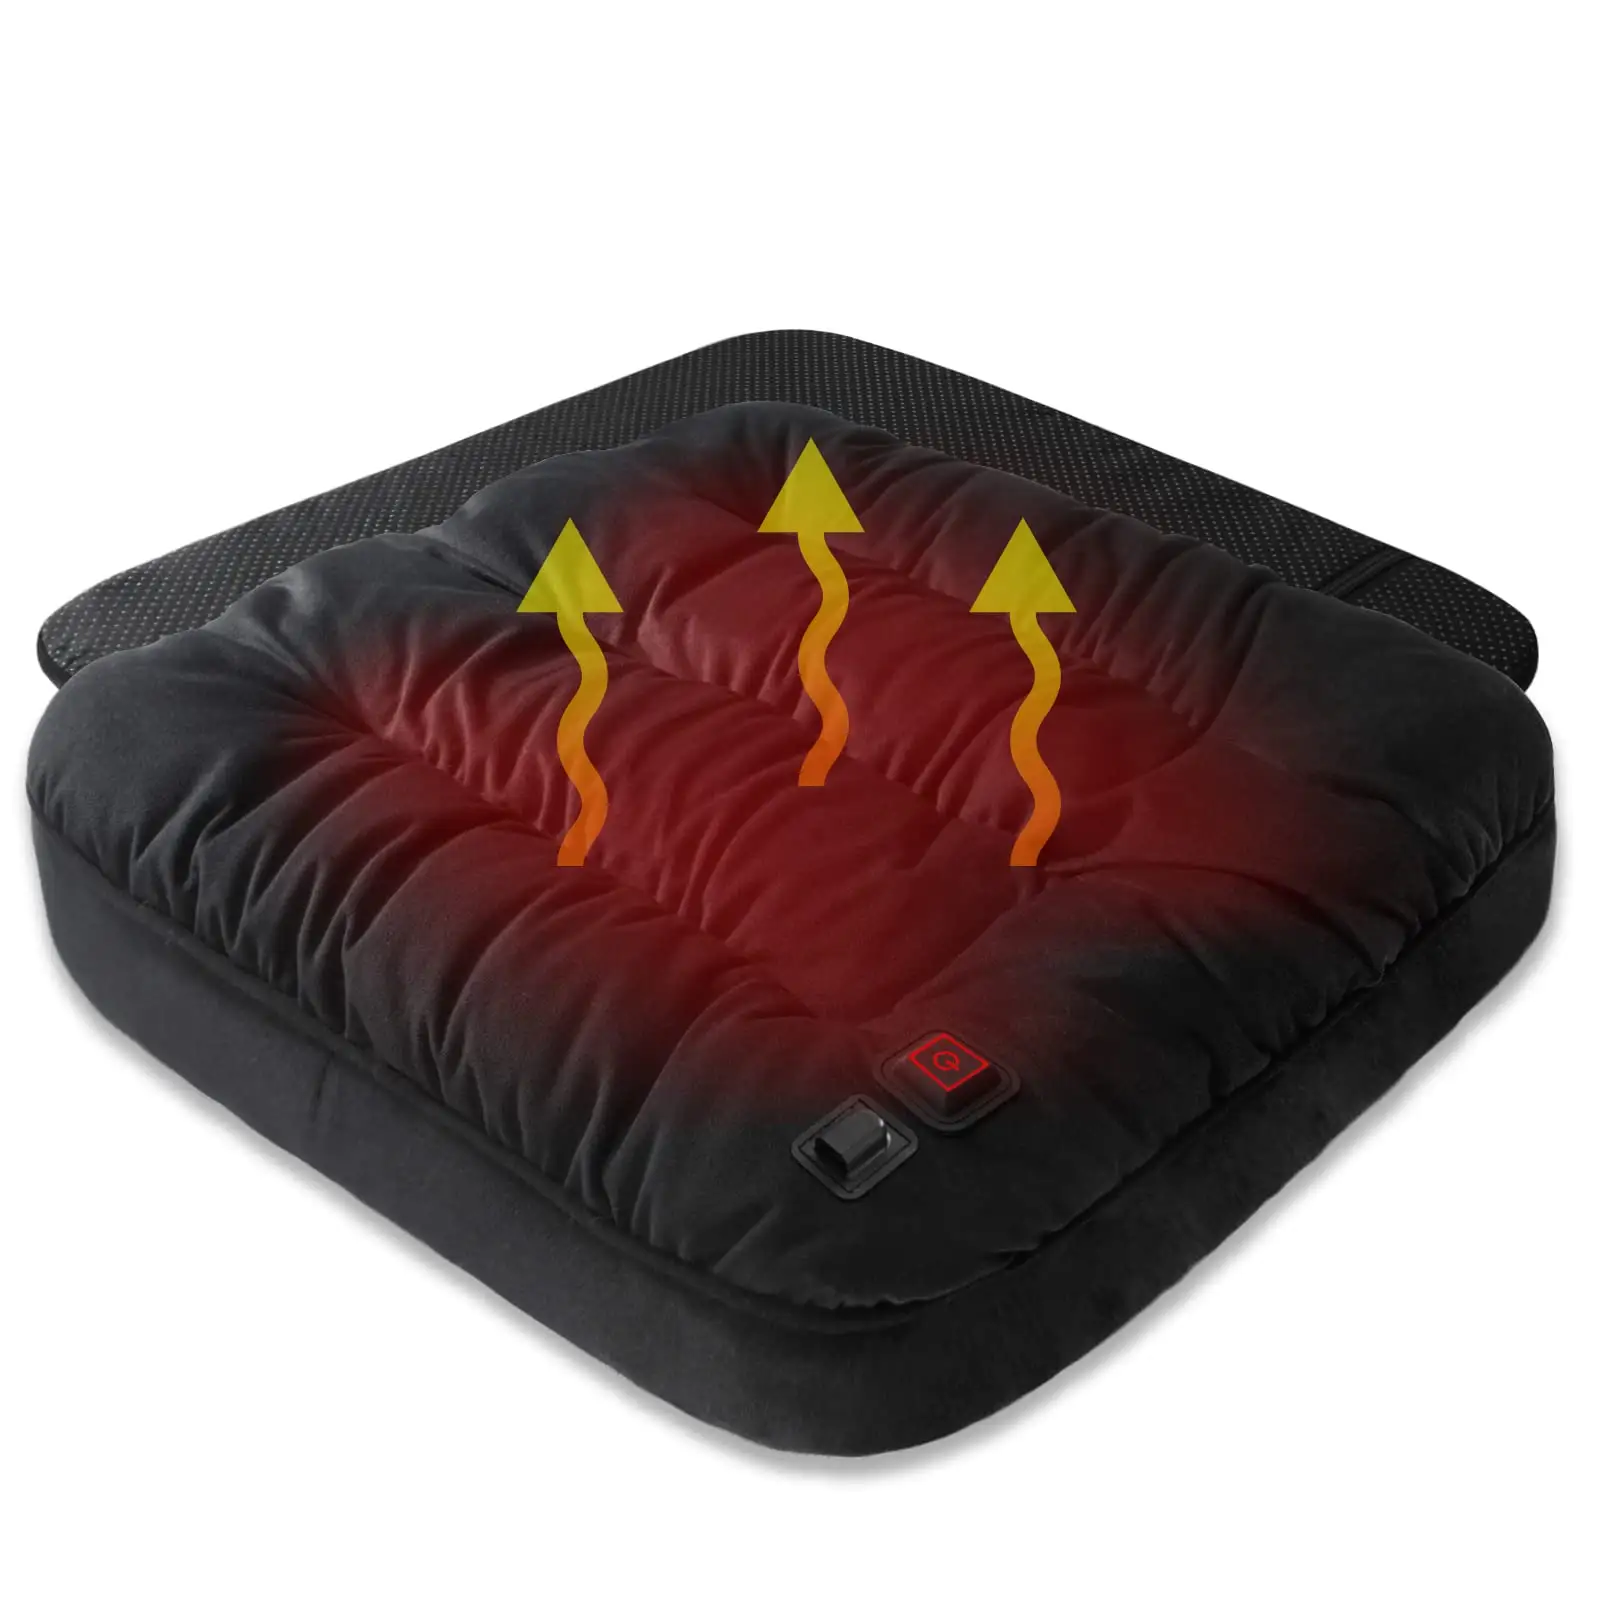 18 x 18 Inches Heating Graphene Heating Chip Thicken USB Electric Office Chair Cushion Heated Seat Cushion for Stadium